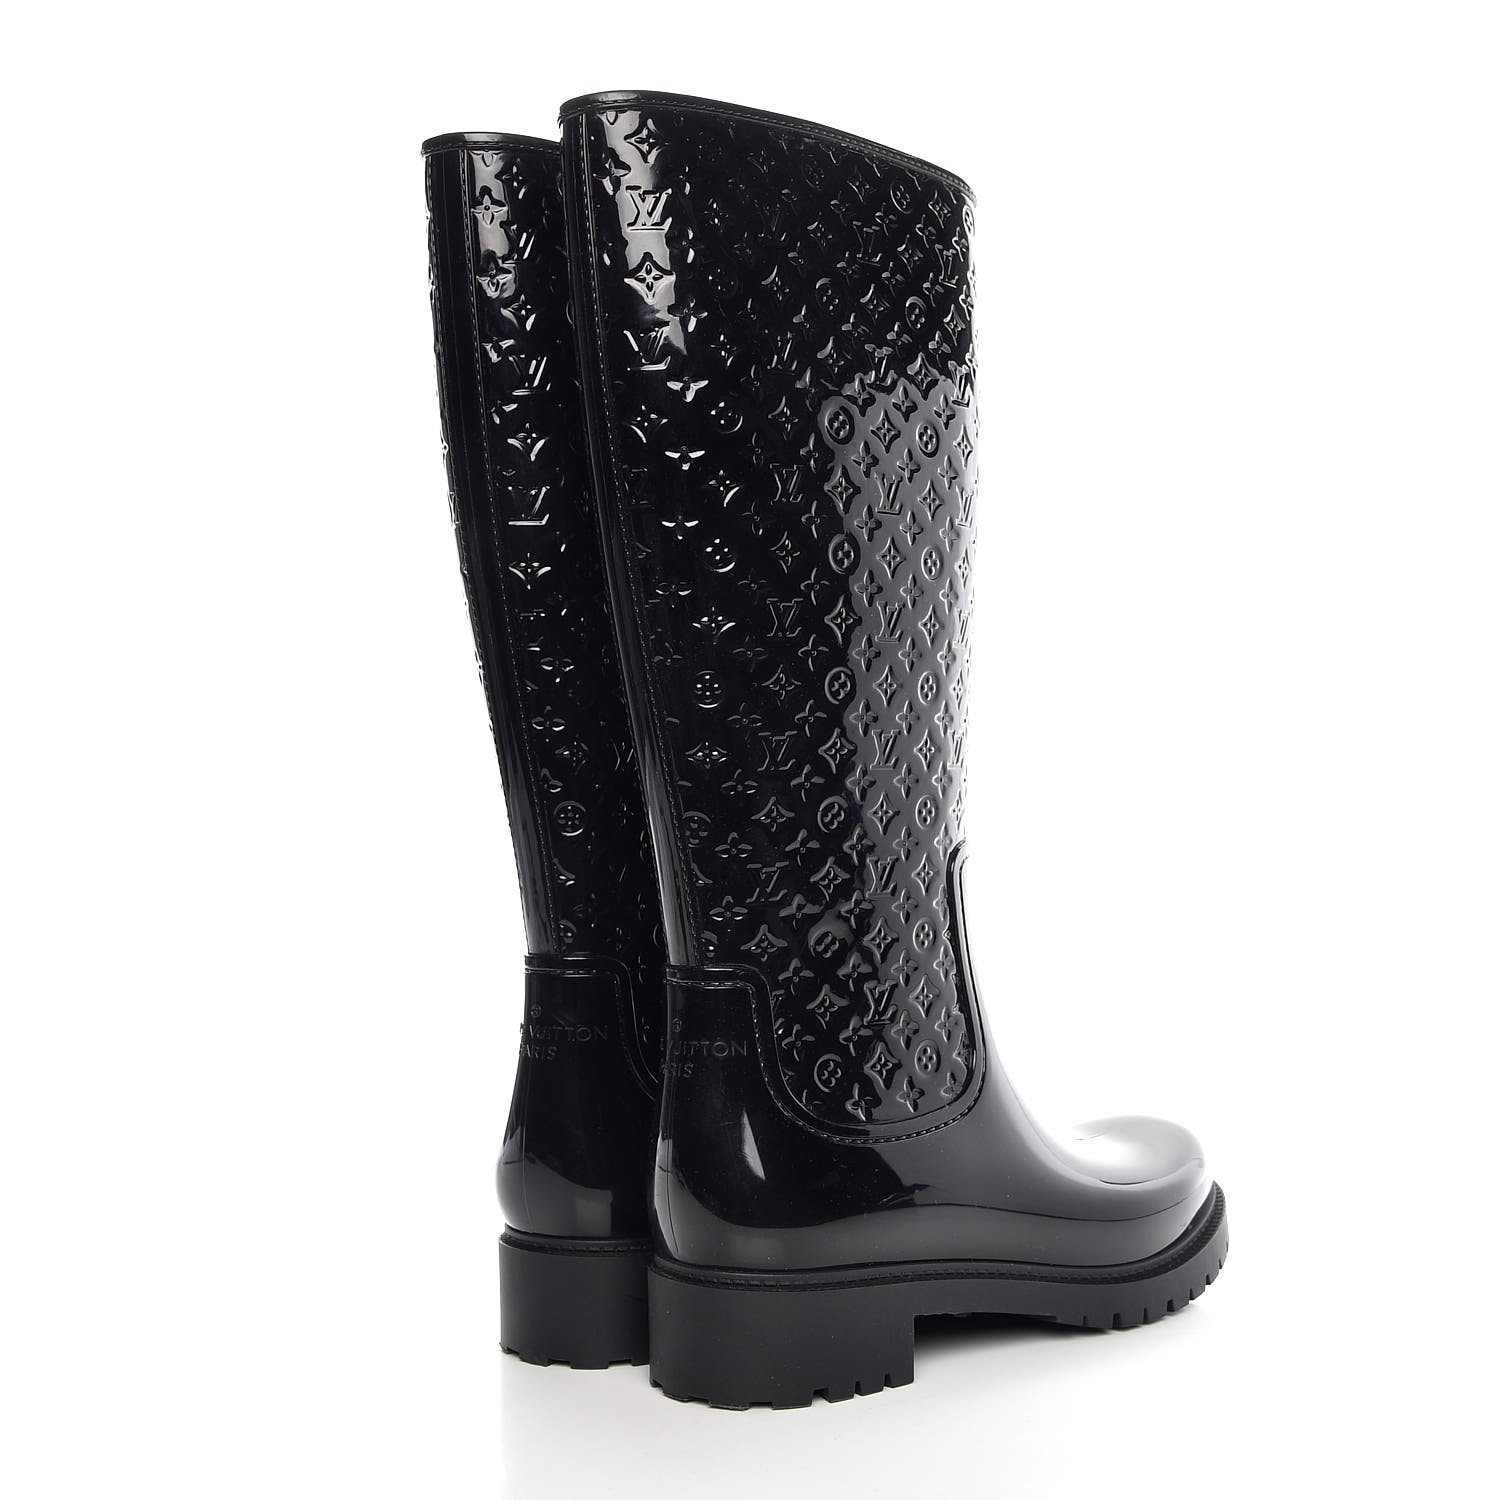 Sold at Auction: A Pair of Louis Vuitton Women's Black Rubber Wellington  Boots. Size 39. In good condition but please see photos. Comes with dust  bags. Ref: 11067